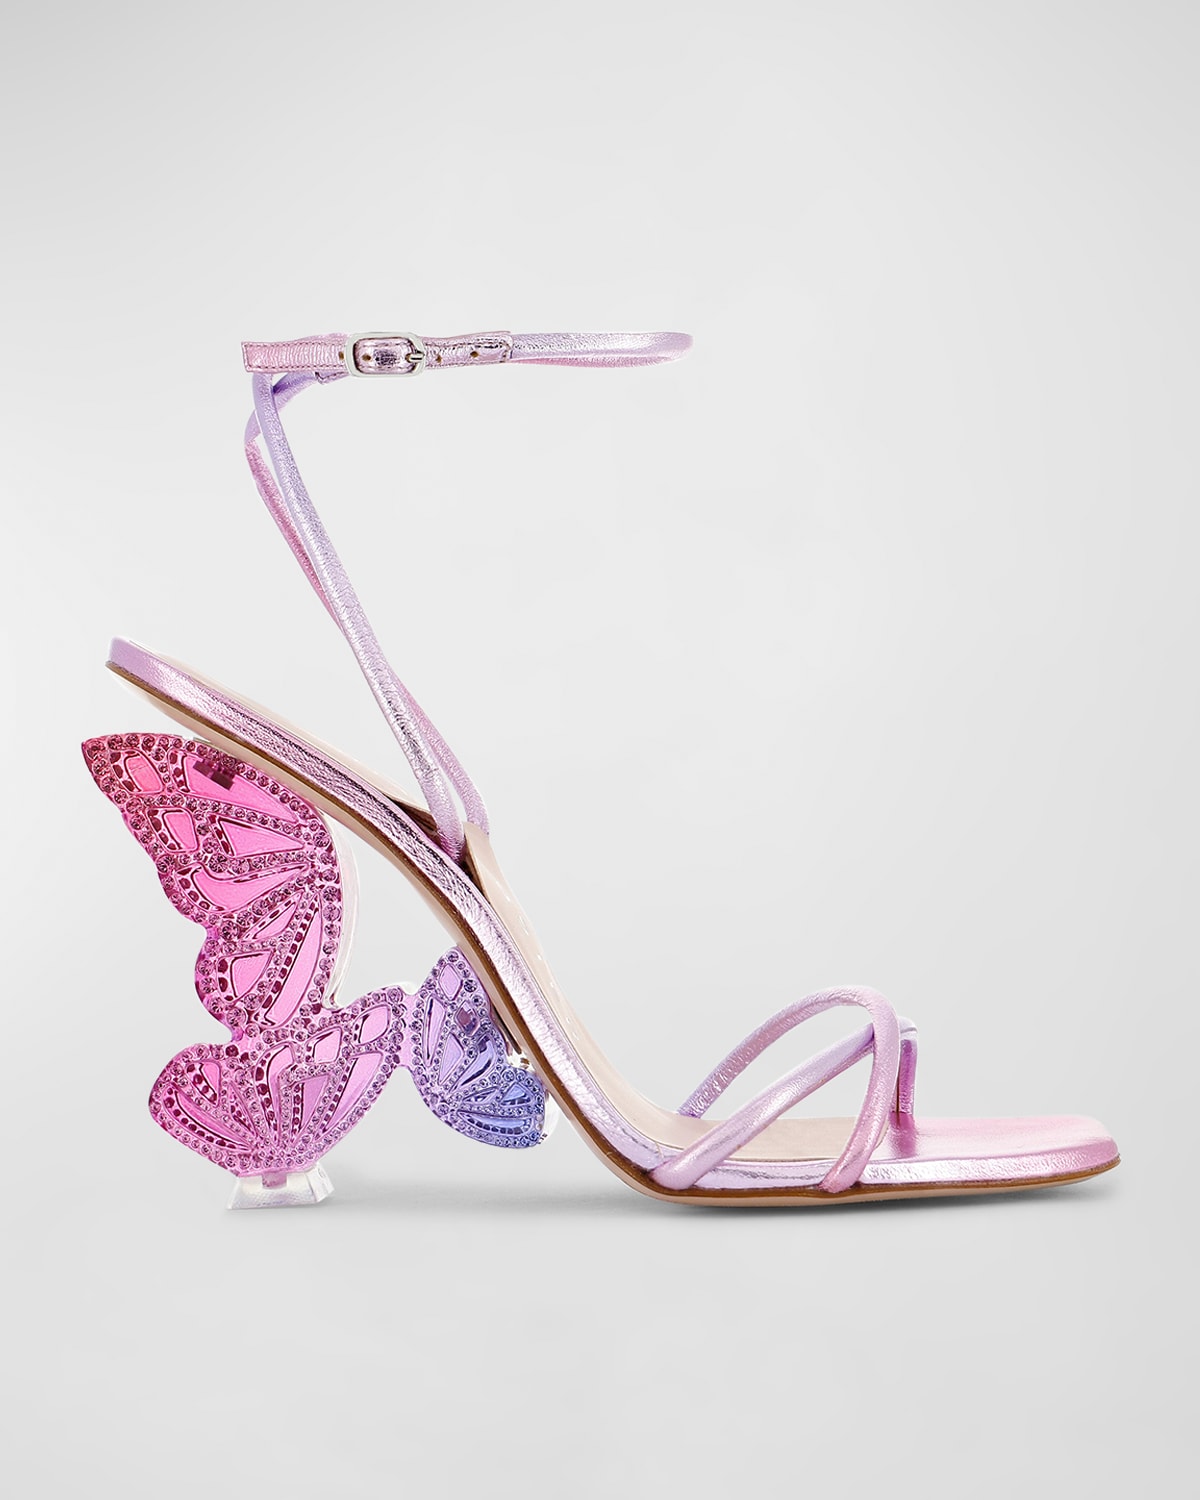 Sophia Webster Paloma Butterfly Metallic Leather Sandals In Blossom